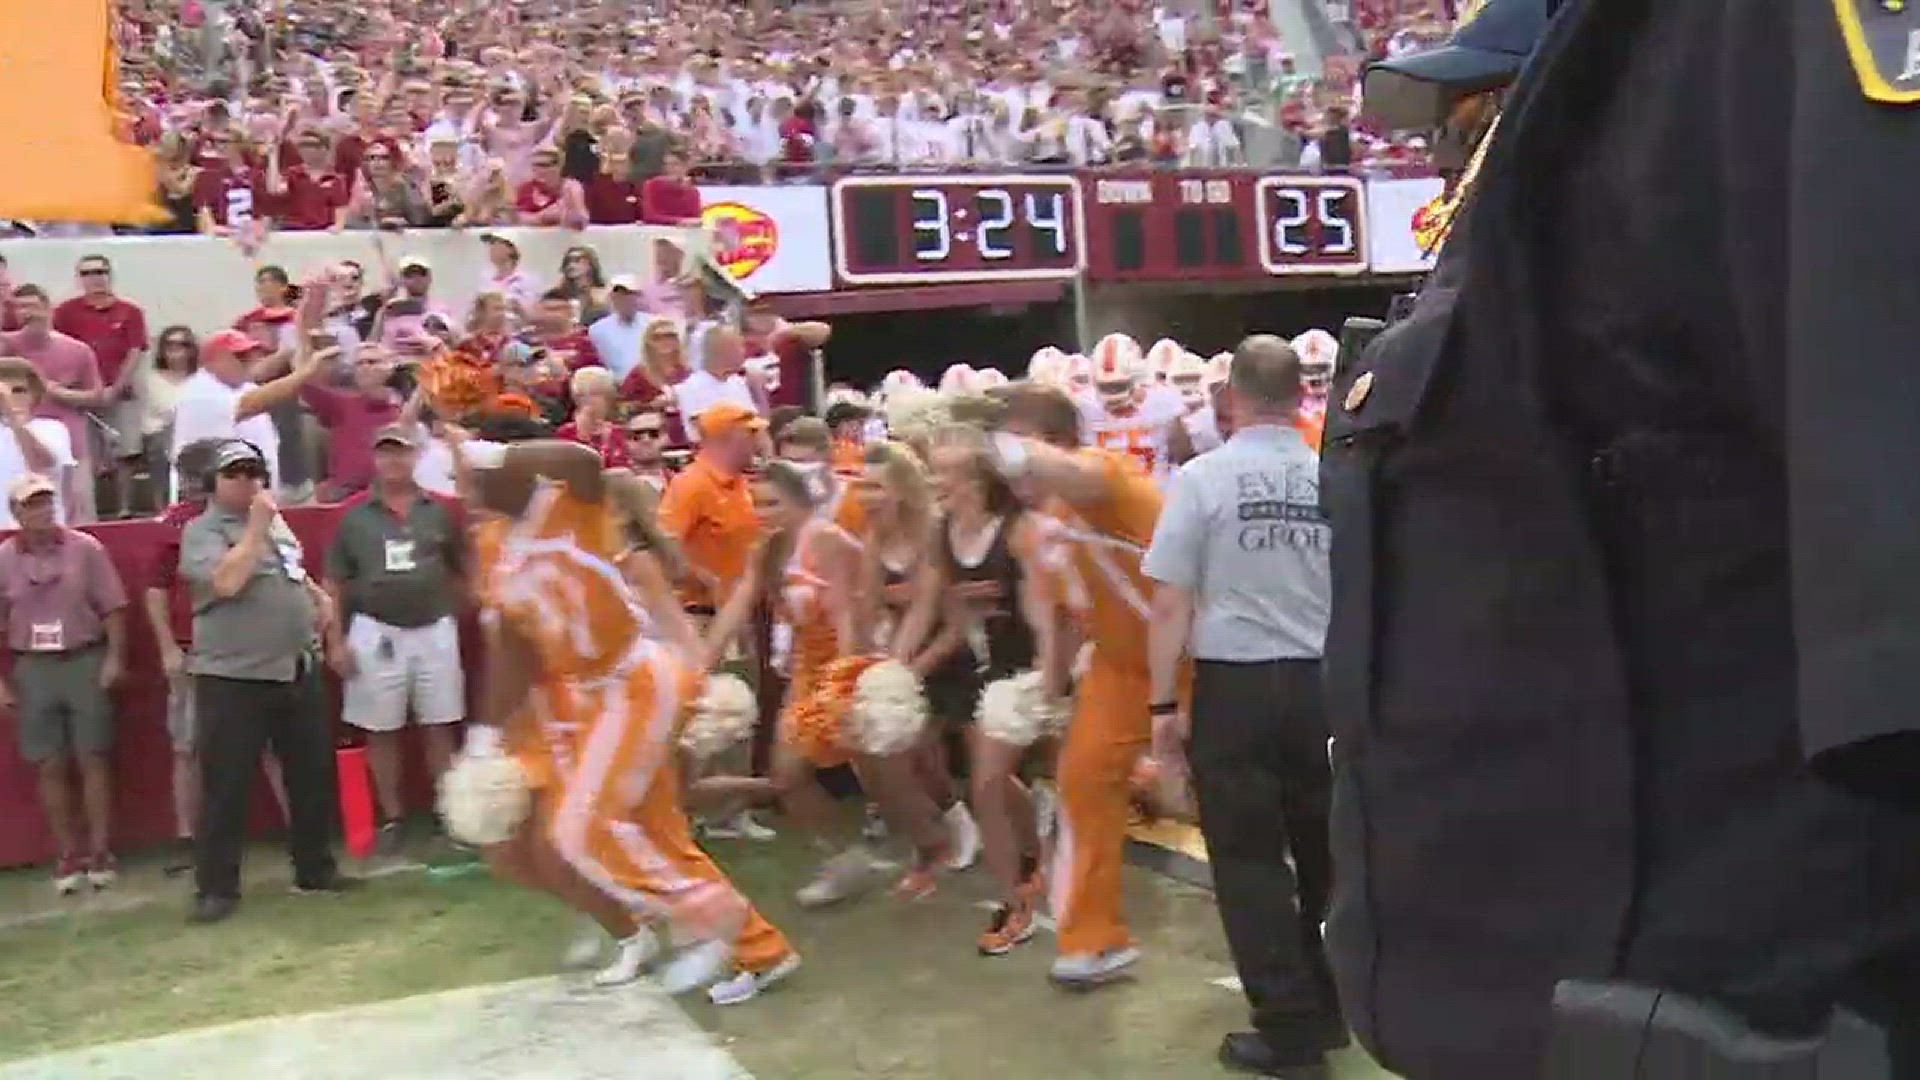 A look at the top plays in the Vols' game against Alabama.